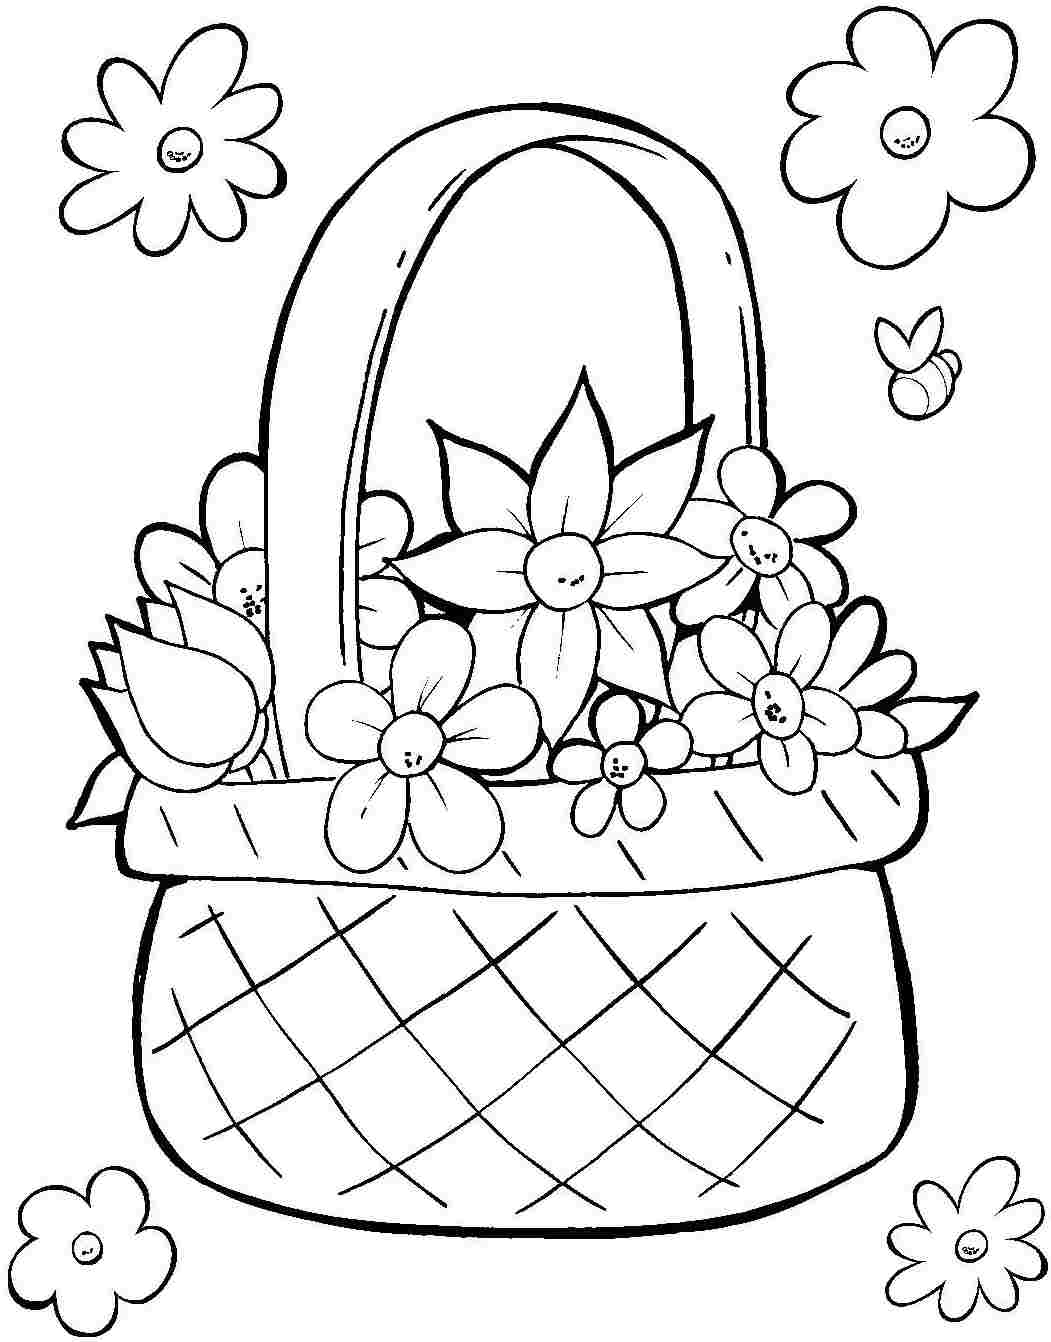 Easter Basket Printable Coloring Pages at Free